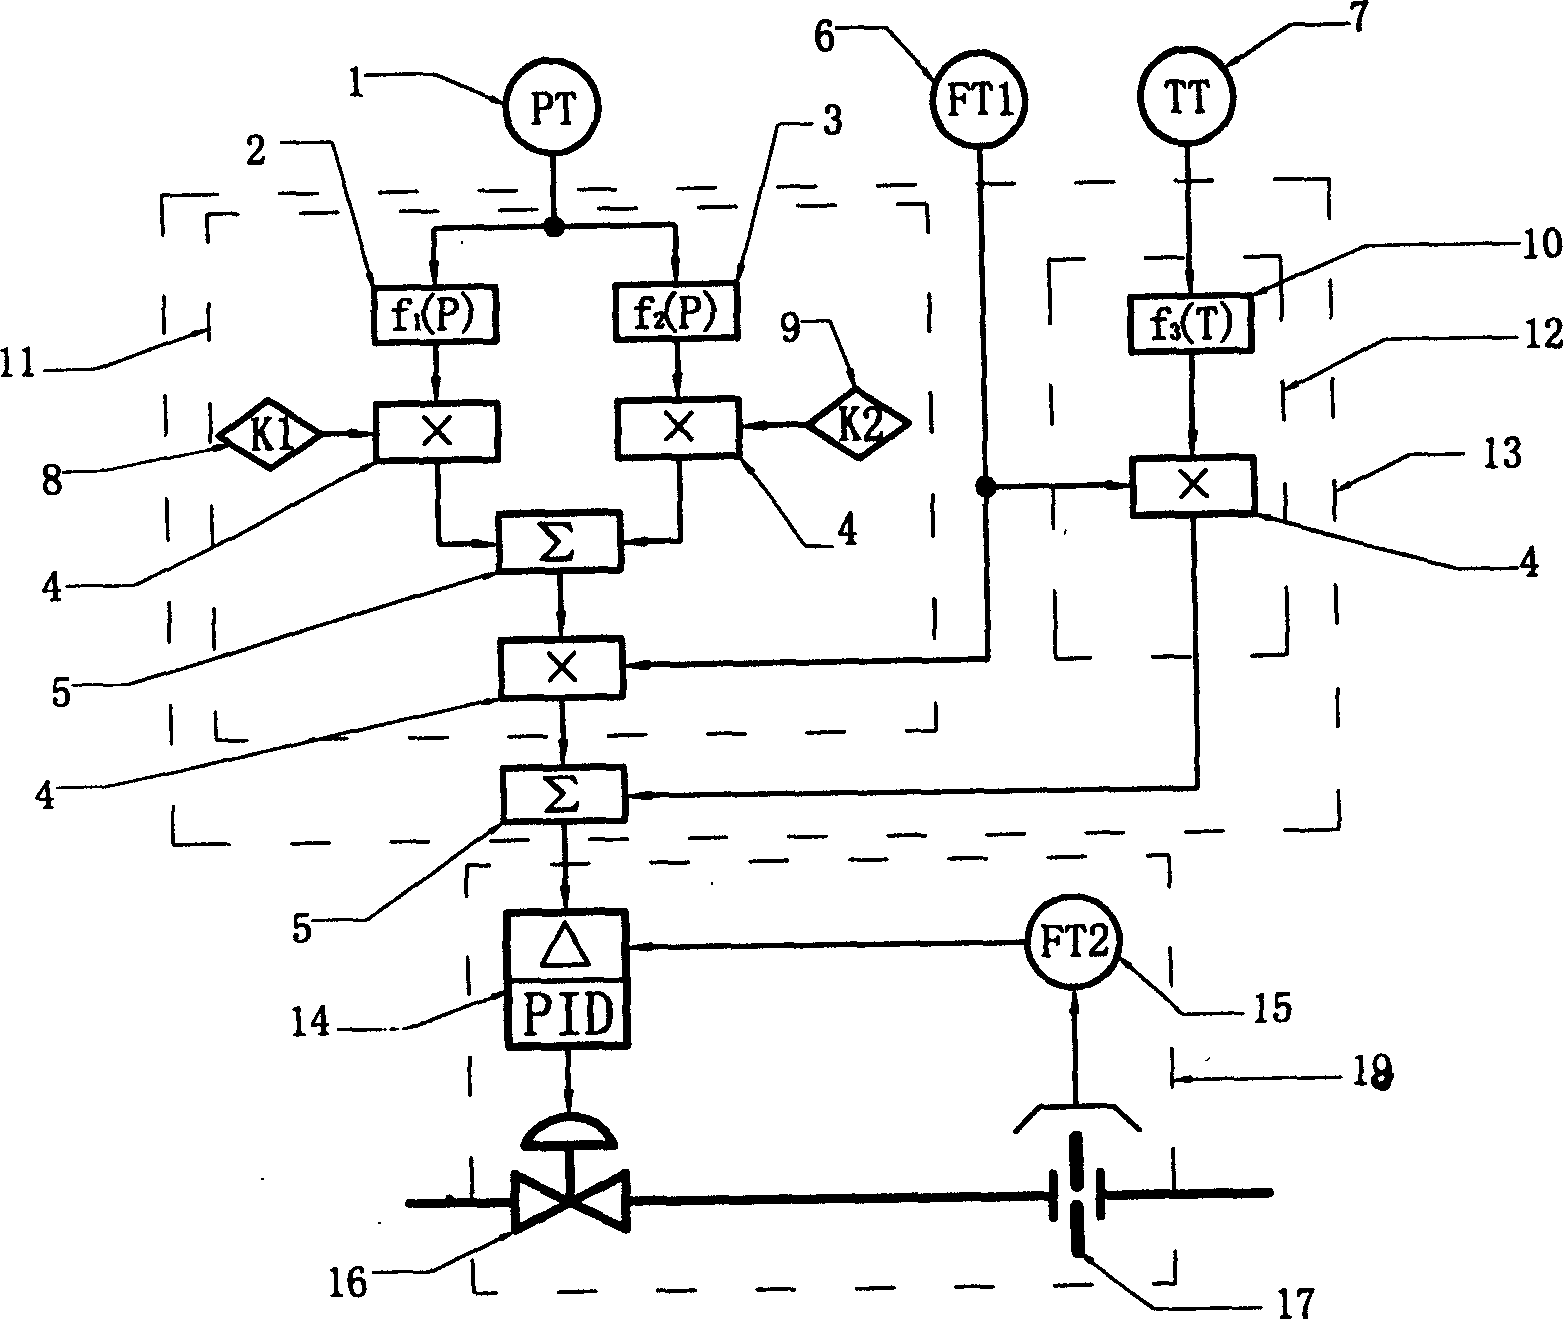 Automatic regulating and controlling method of wet steam boiler dryness